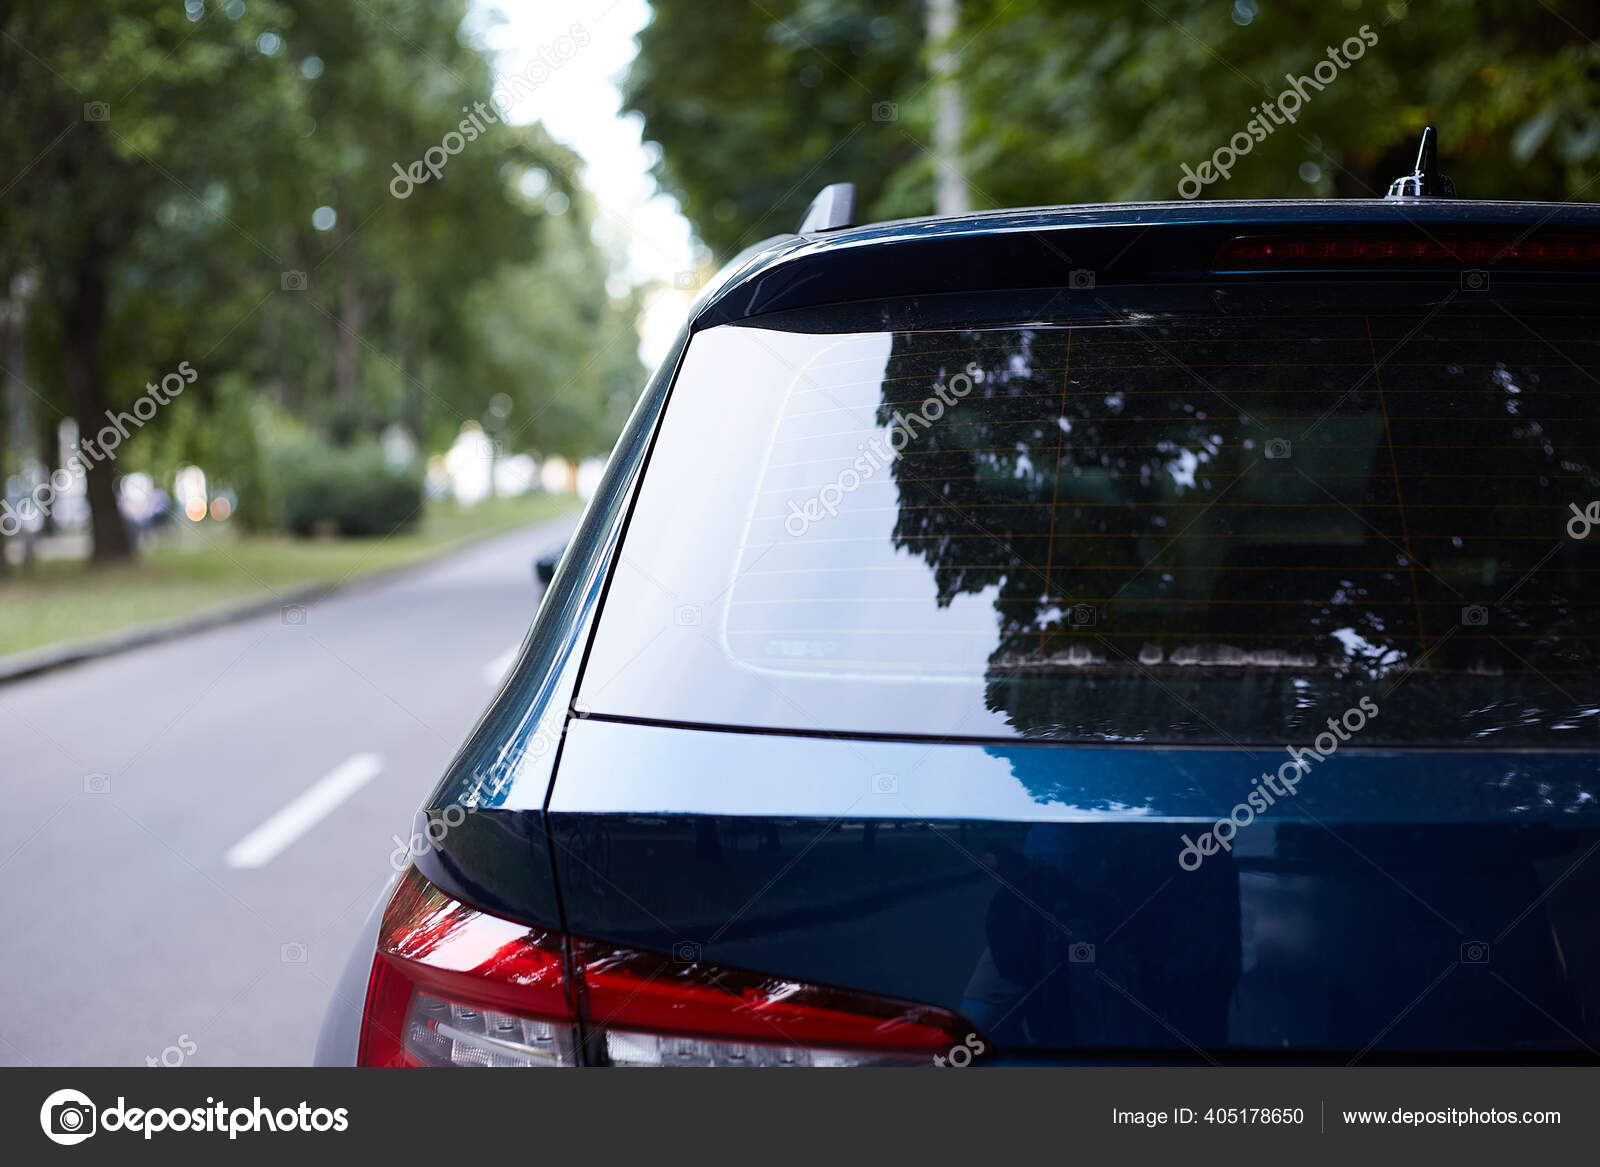 Download Back Window Of Blue Car Parked On The Street In Summer Sunny Day Rear View Mock Up For Sticker Or Decals Stock Photo By C Foxalexey 405178650